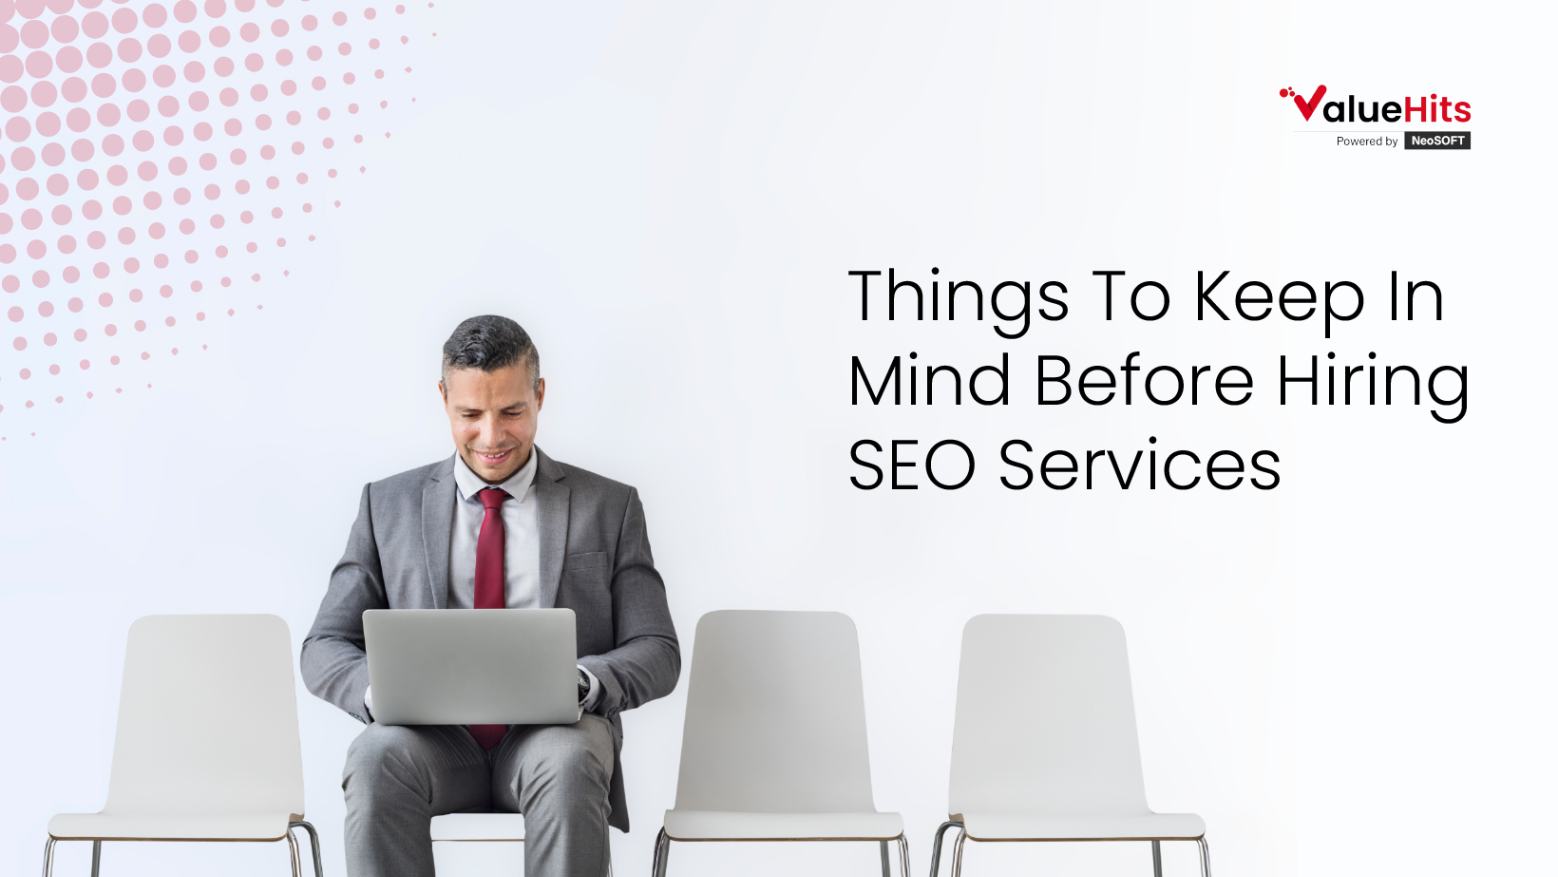 Things To Keep In Mind Before Hiring SEO Services